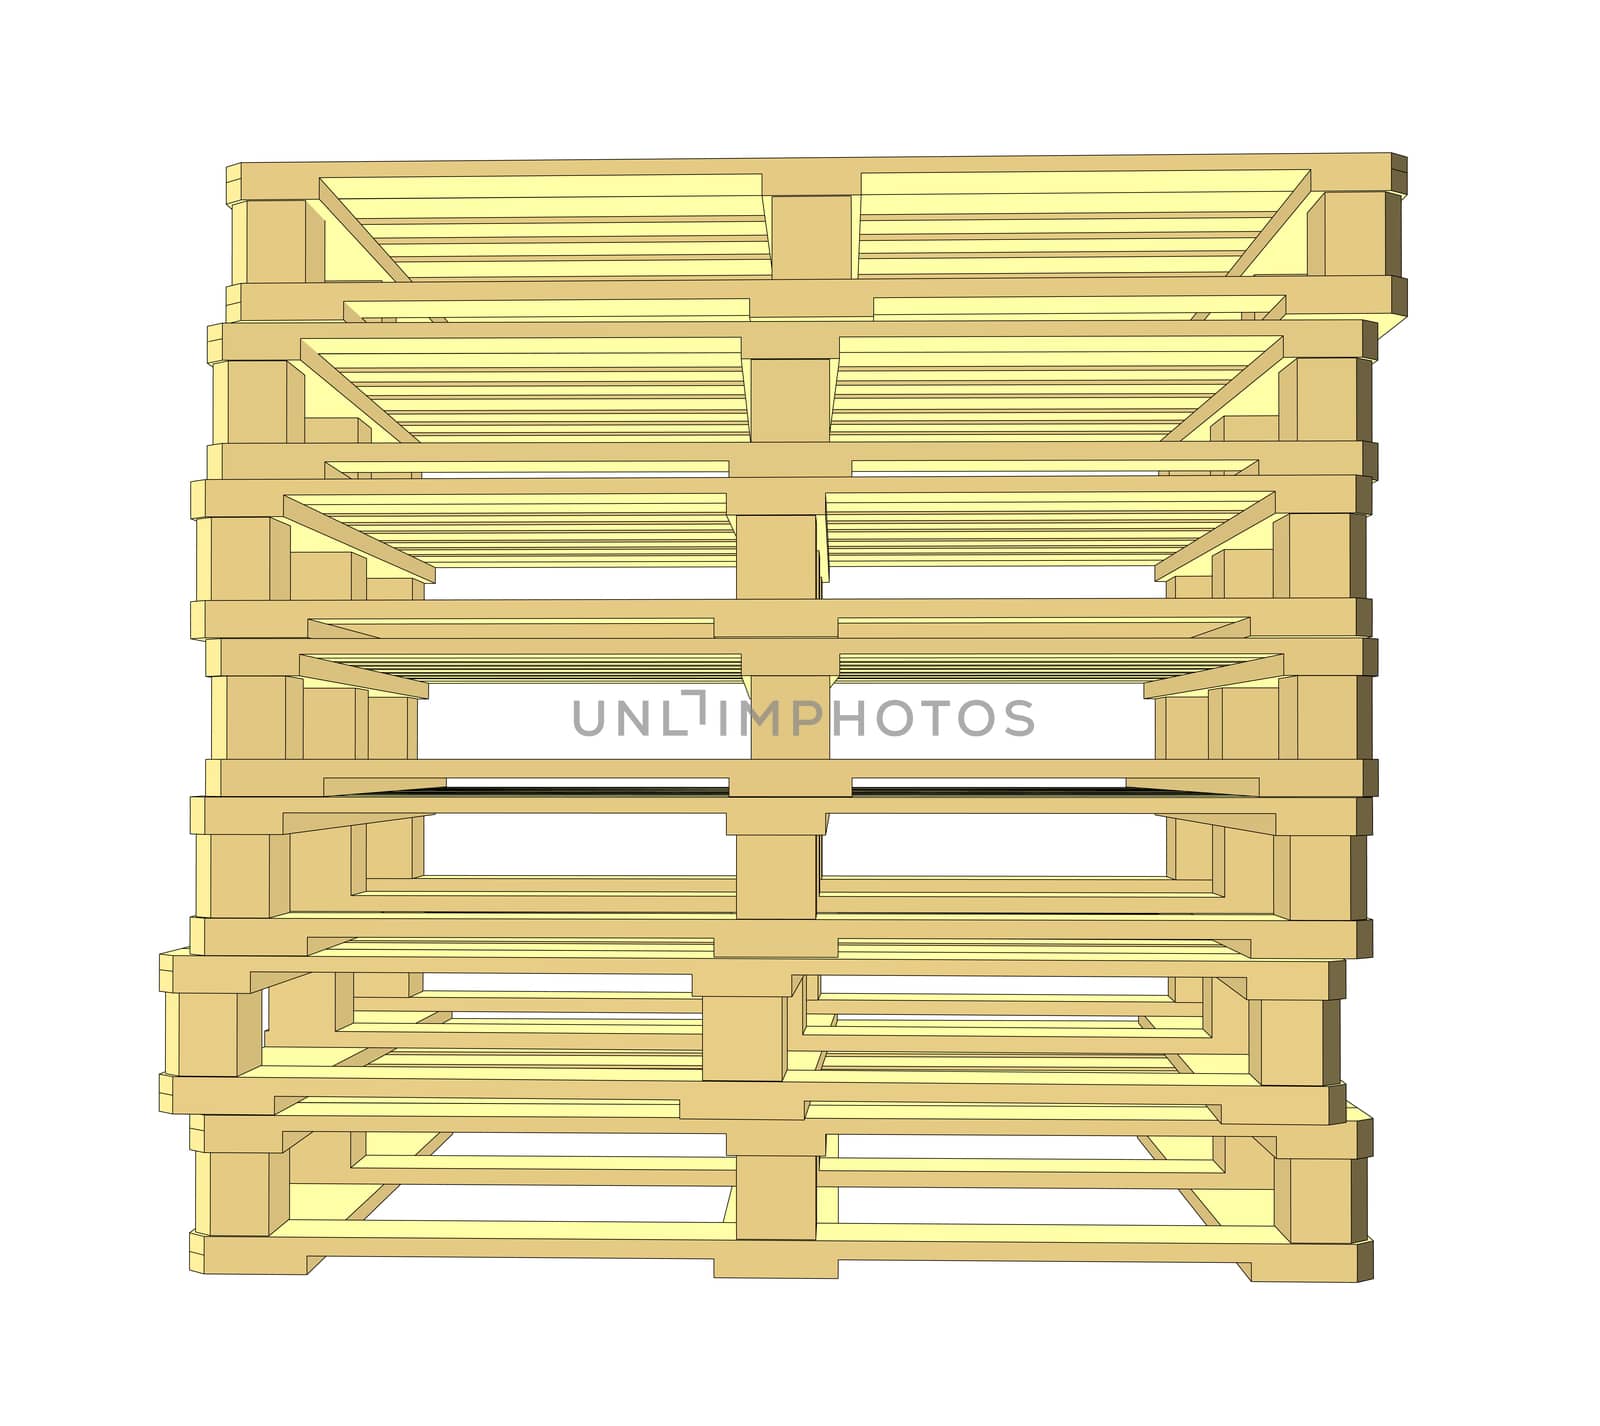 Wooden pallets. Isolated on white. 3d illustration